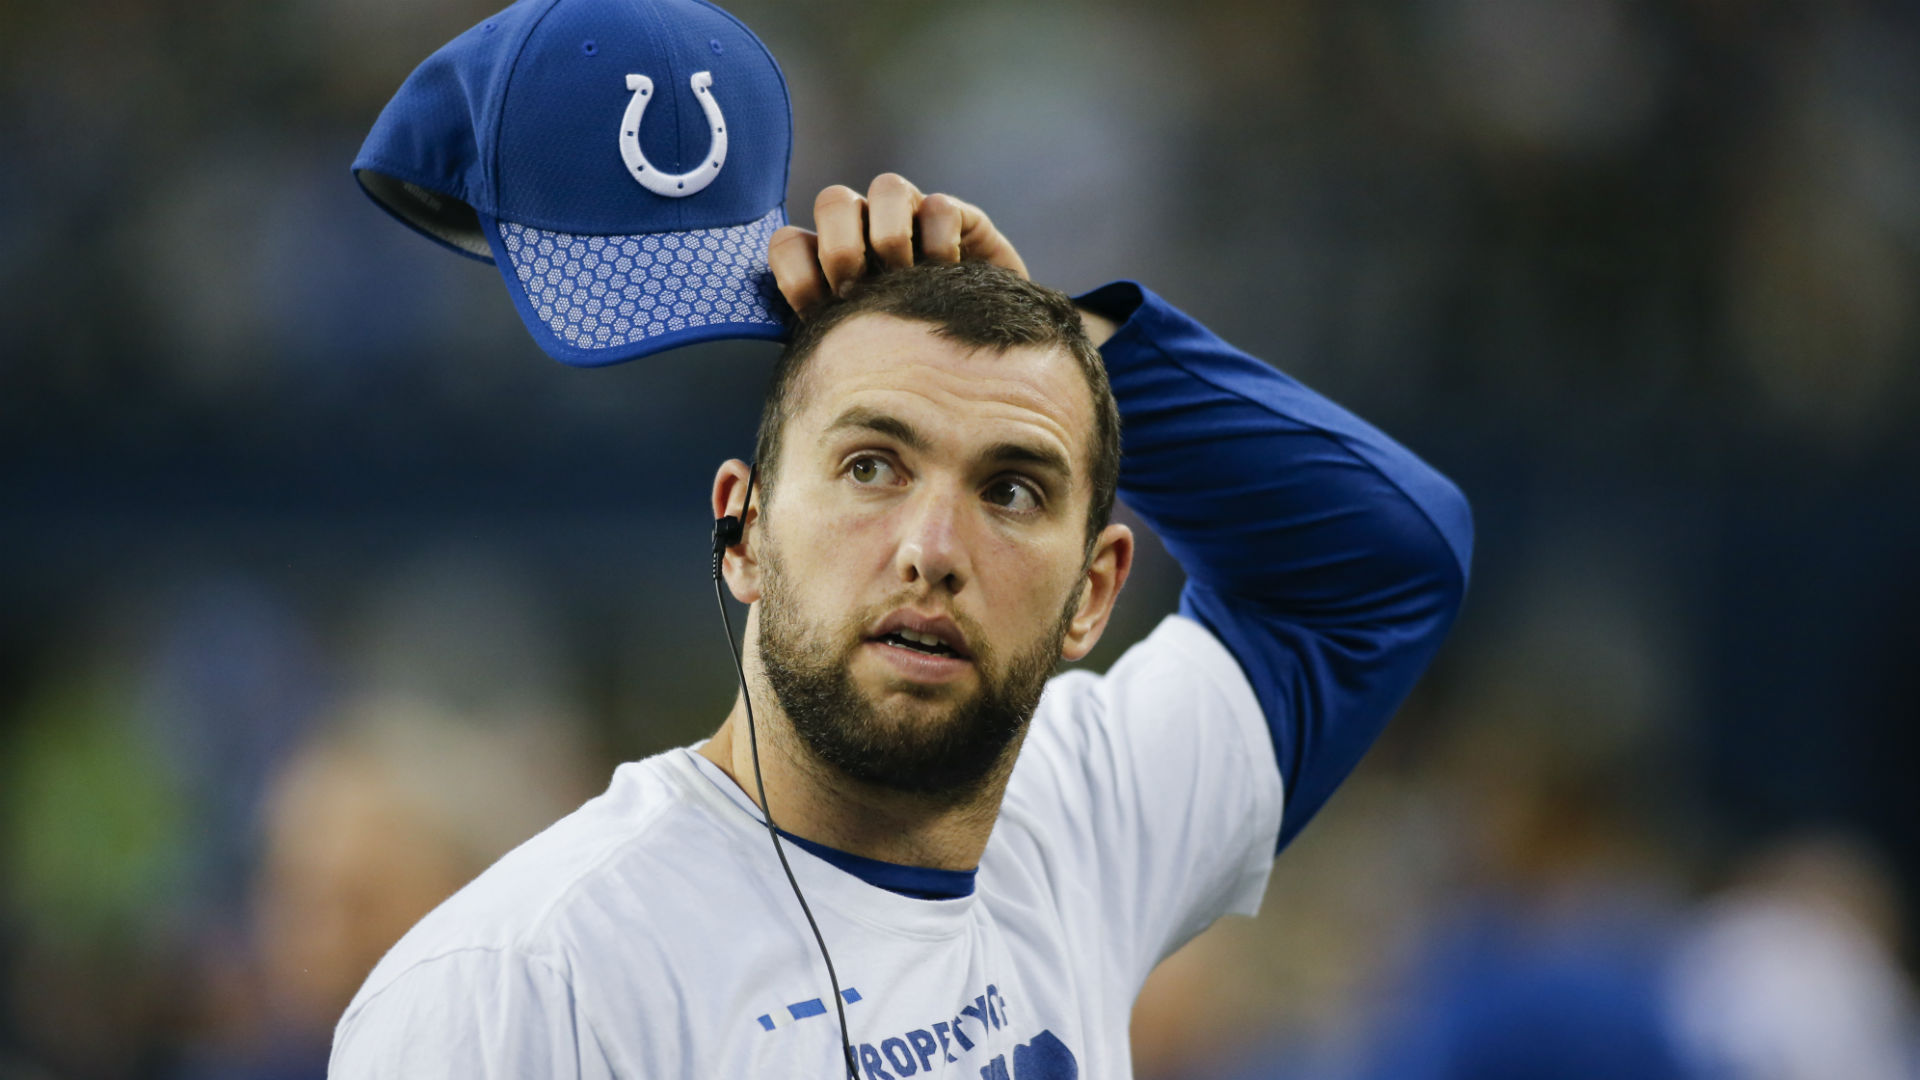 Andrew Luck, still not throwing, running out of time to ease Colts' anxiety